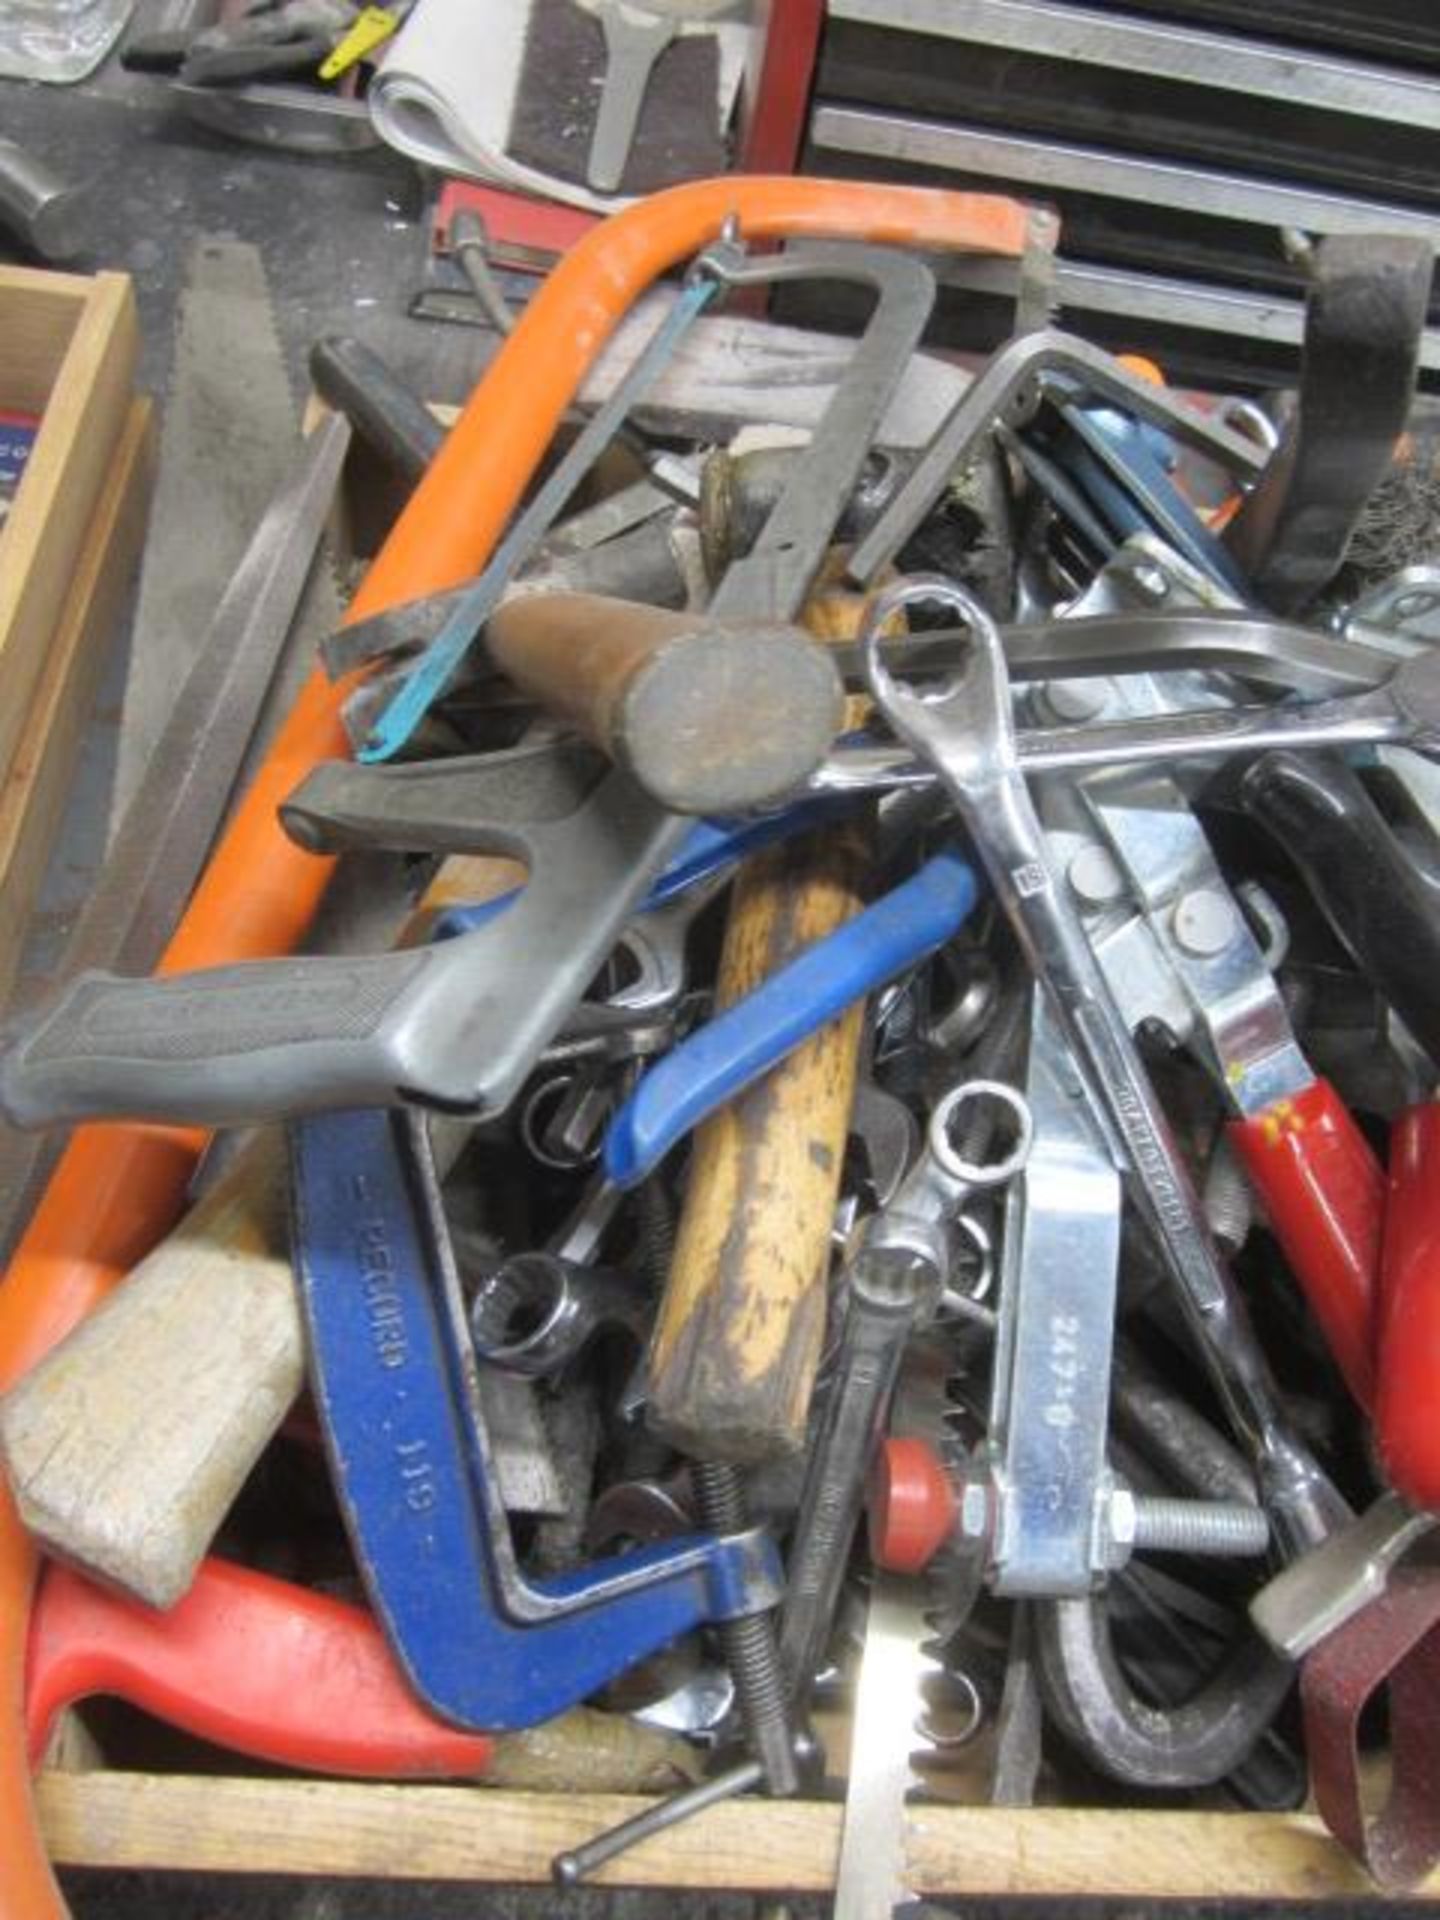 Quantity of hand tools including spanners, mallets, hacksaw, screw drivers, oil cans, sledge hammer, - Image 3 of 5